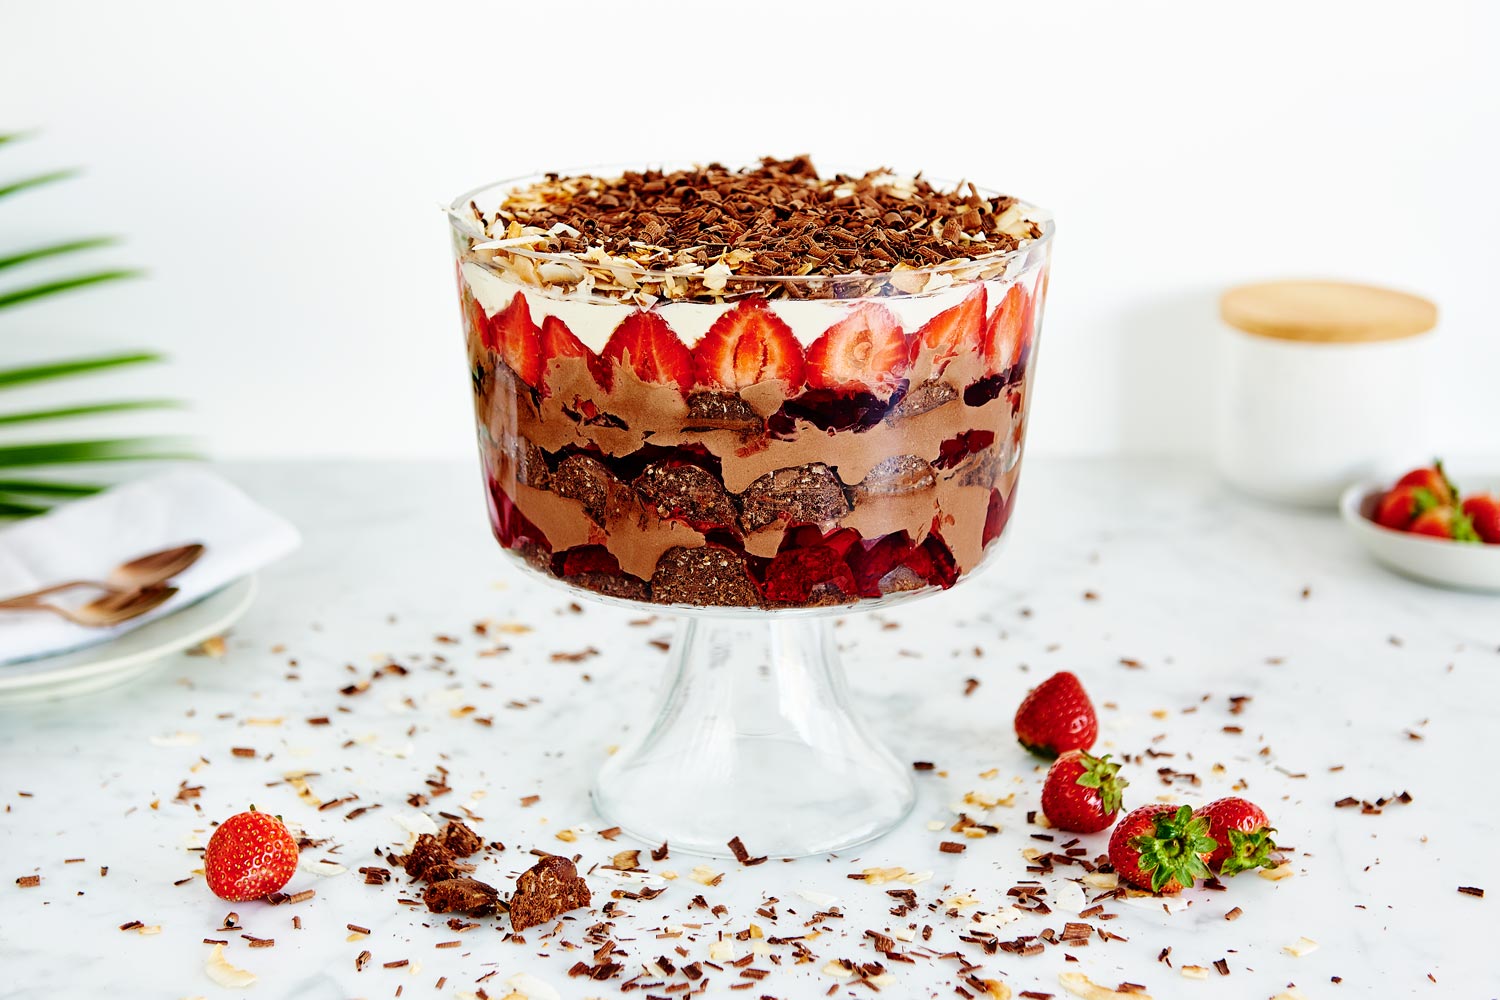 Chocolate and Strawberry Trifle by Christine Manfield